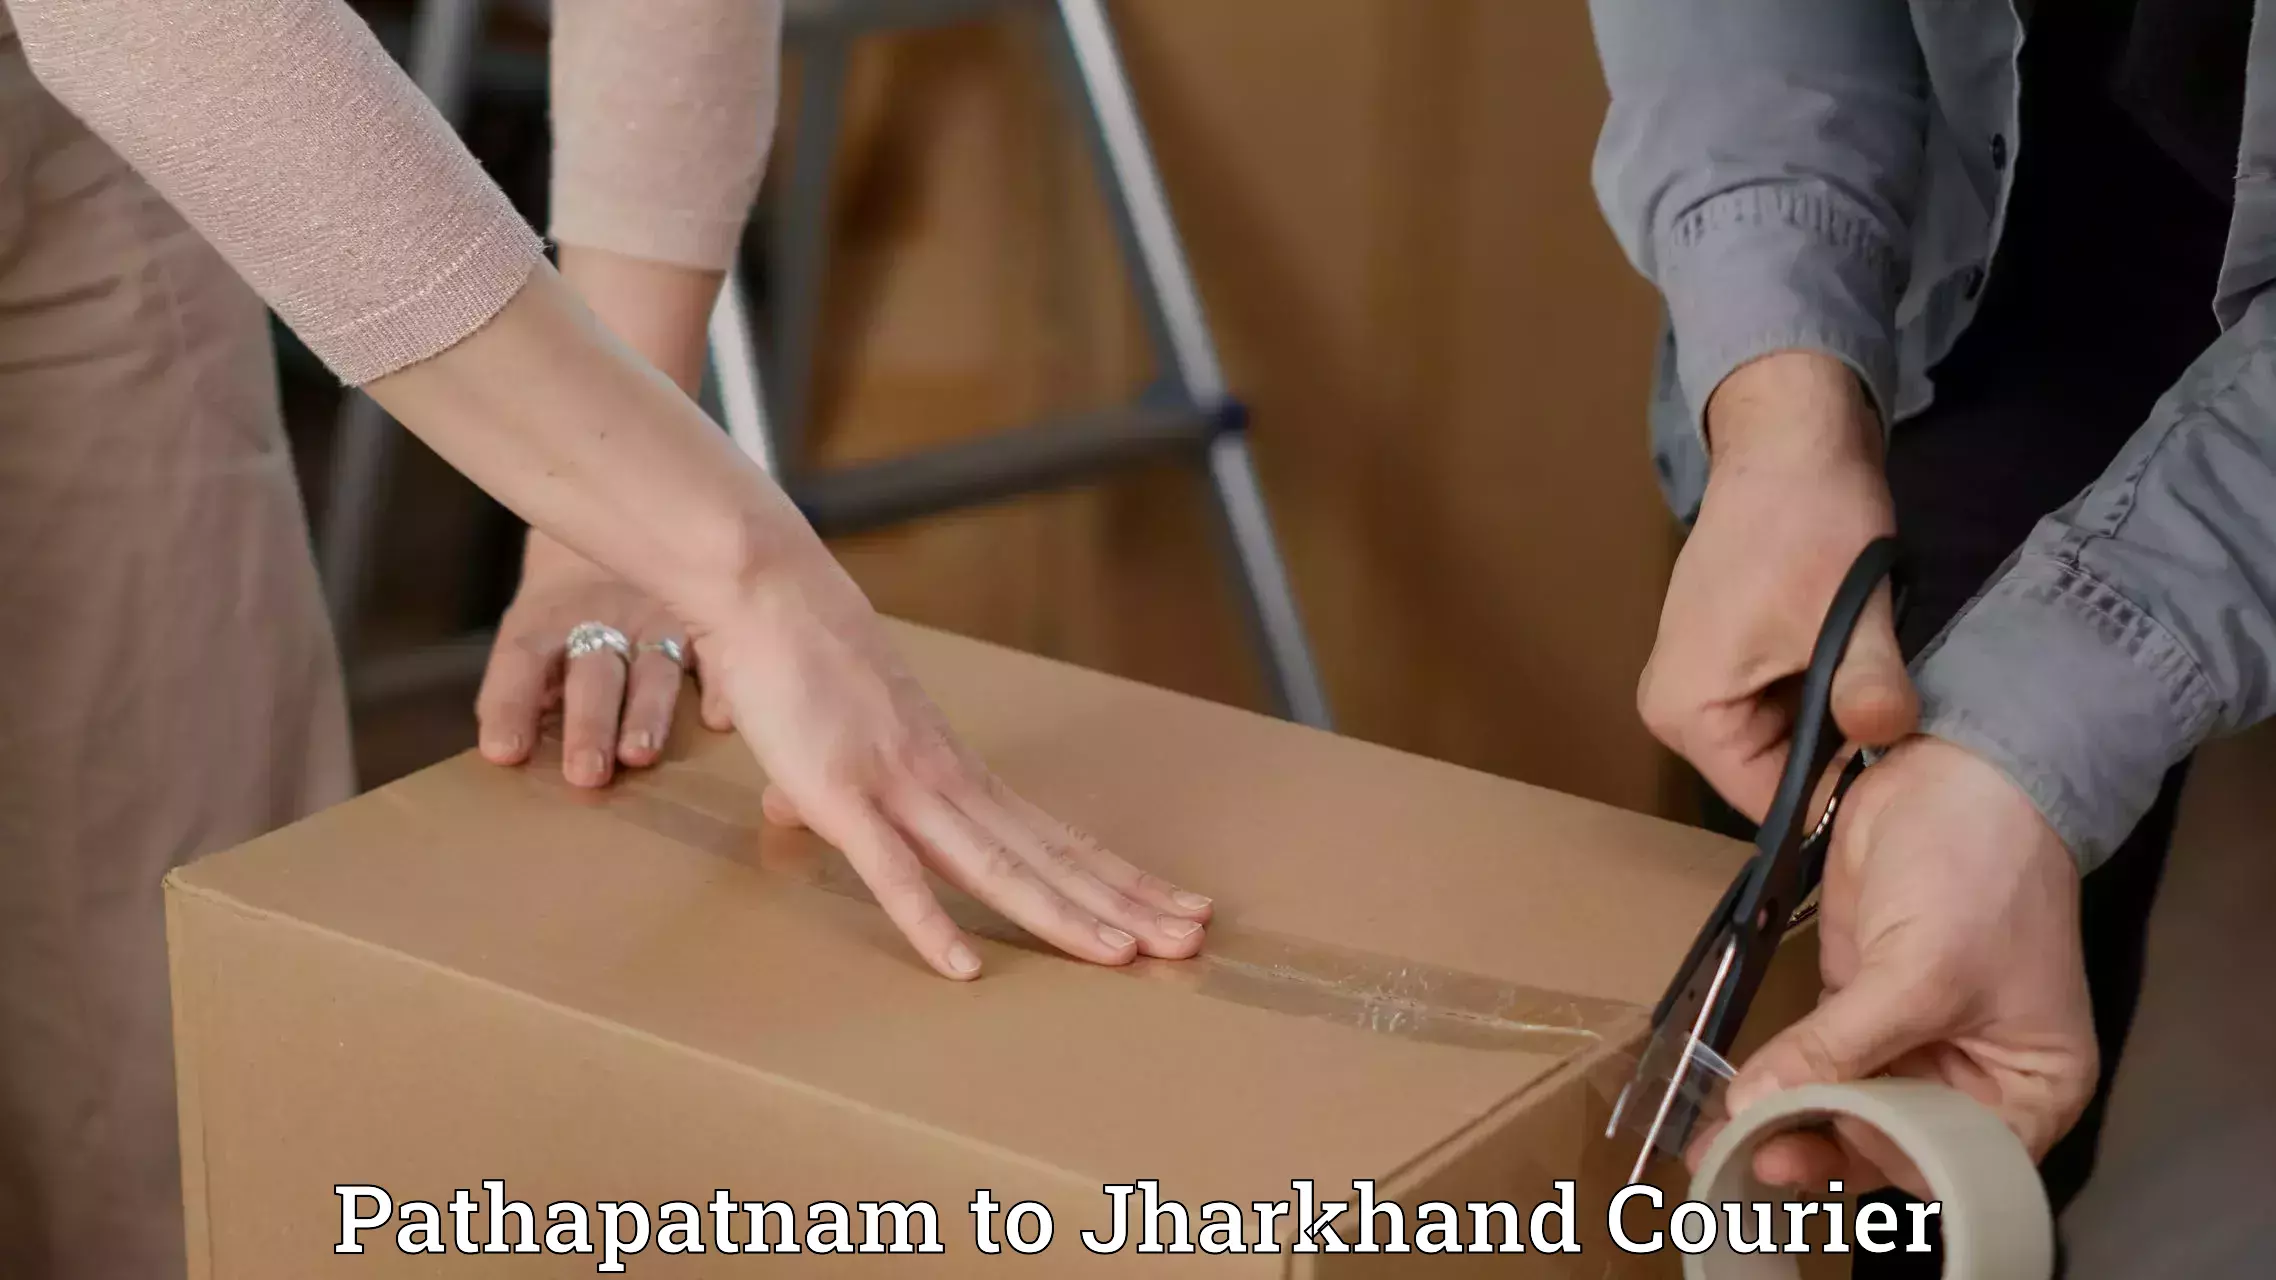 Courier membership in Pathapatnam to Jharia